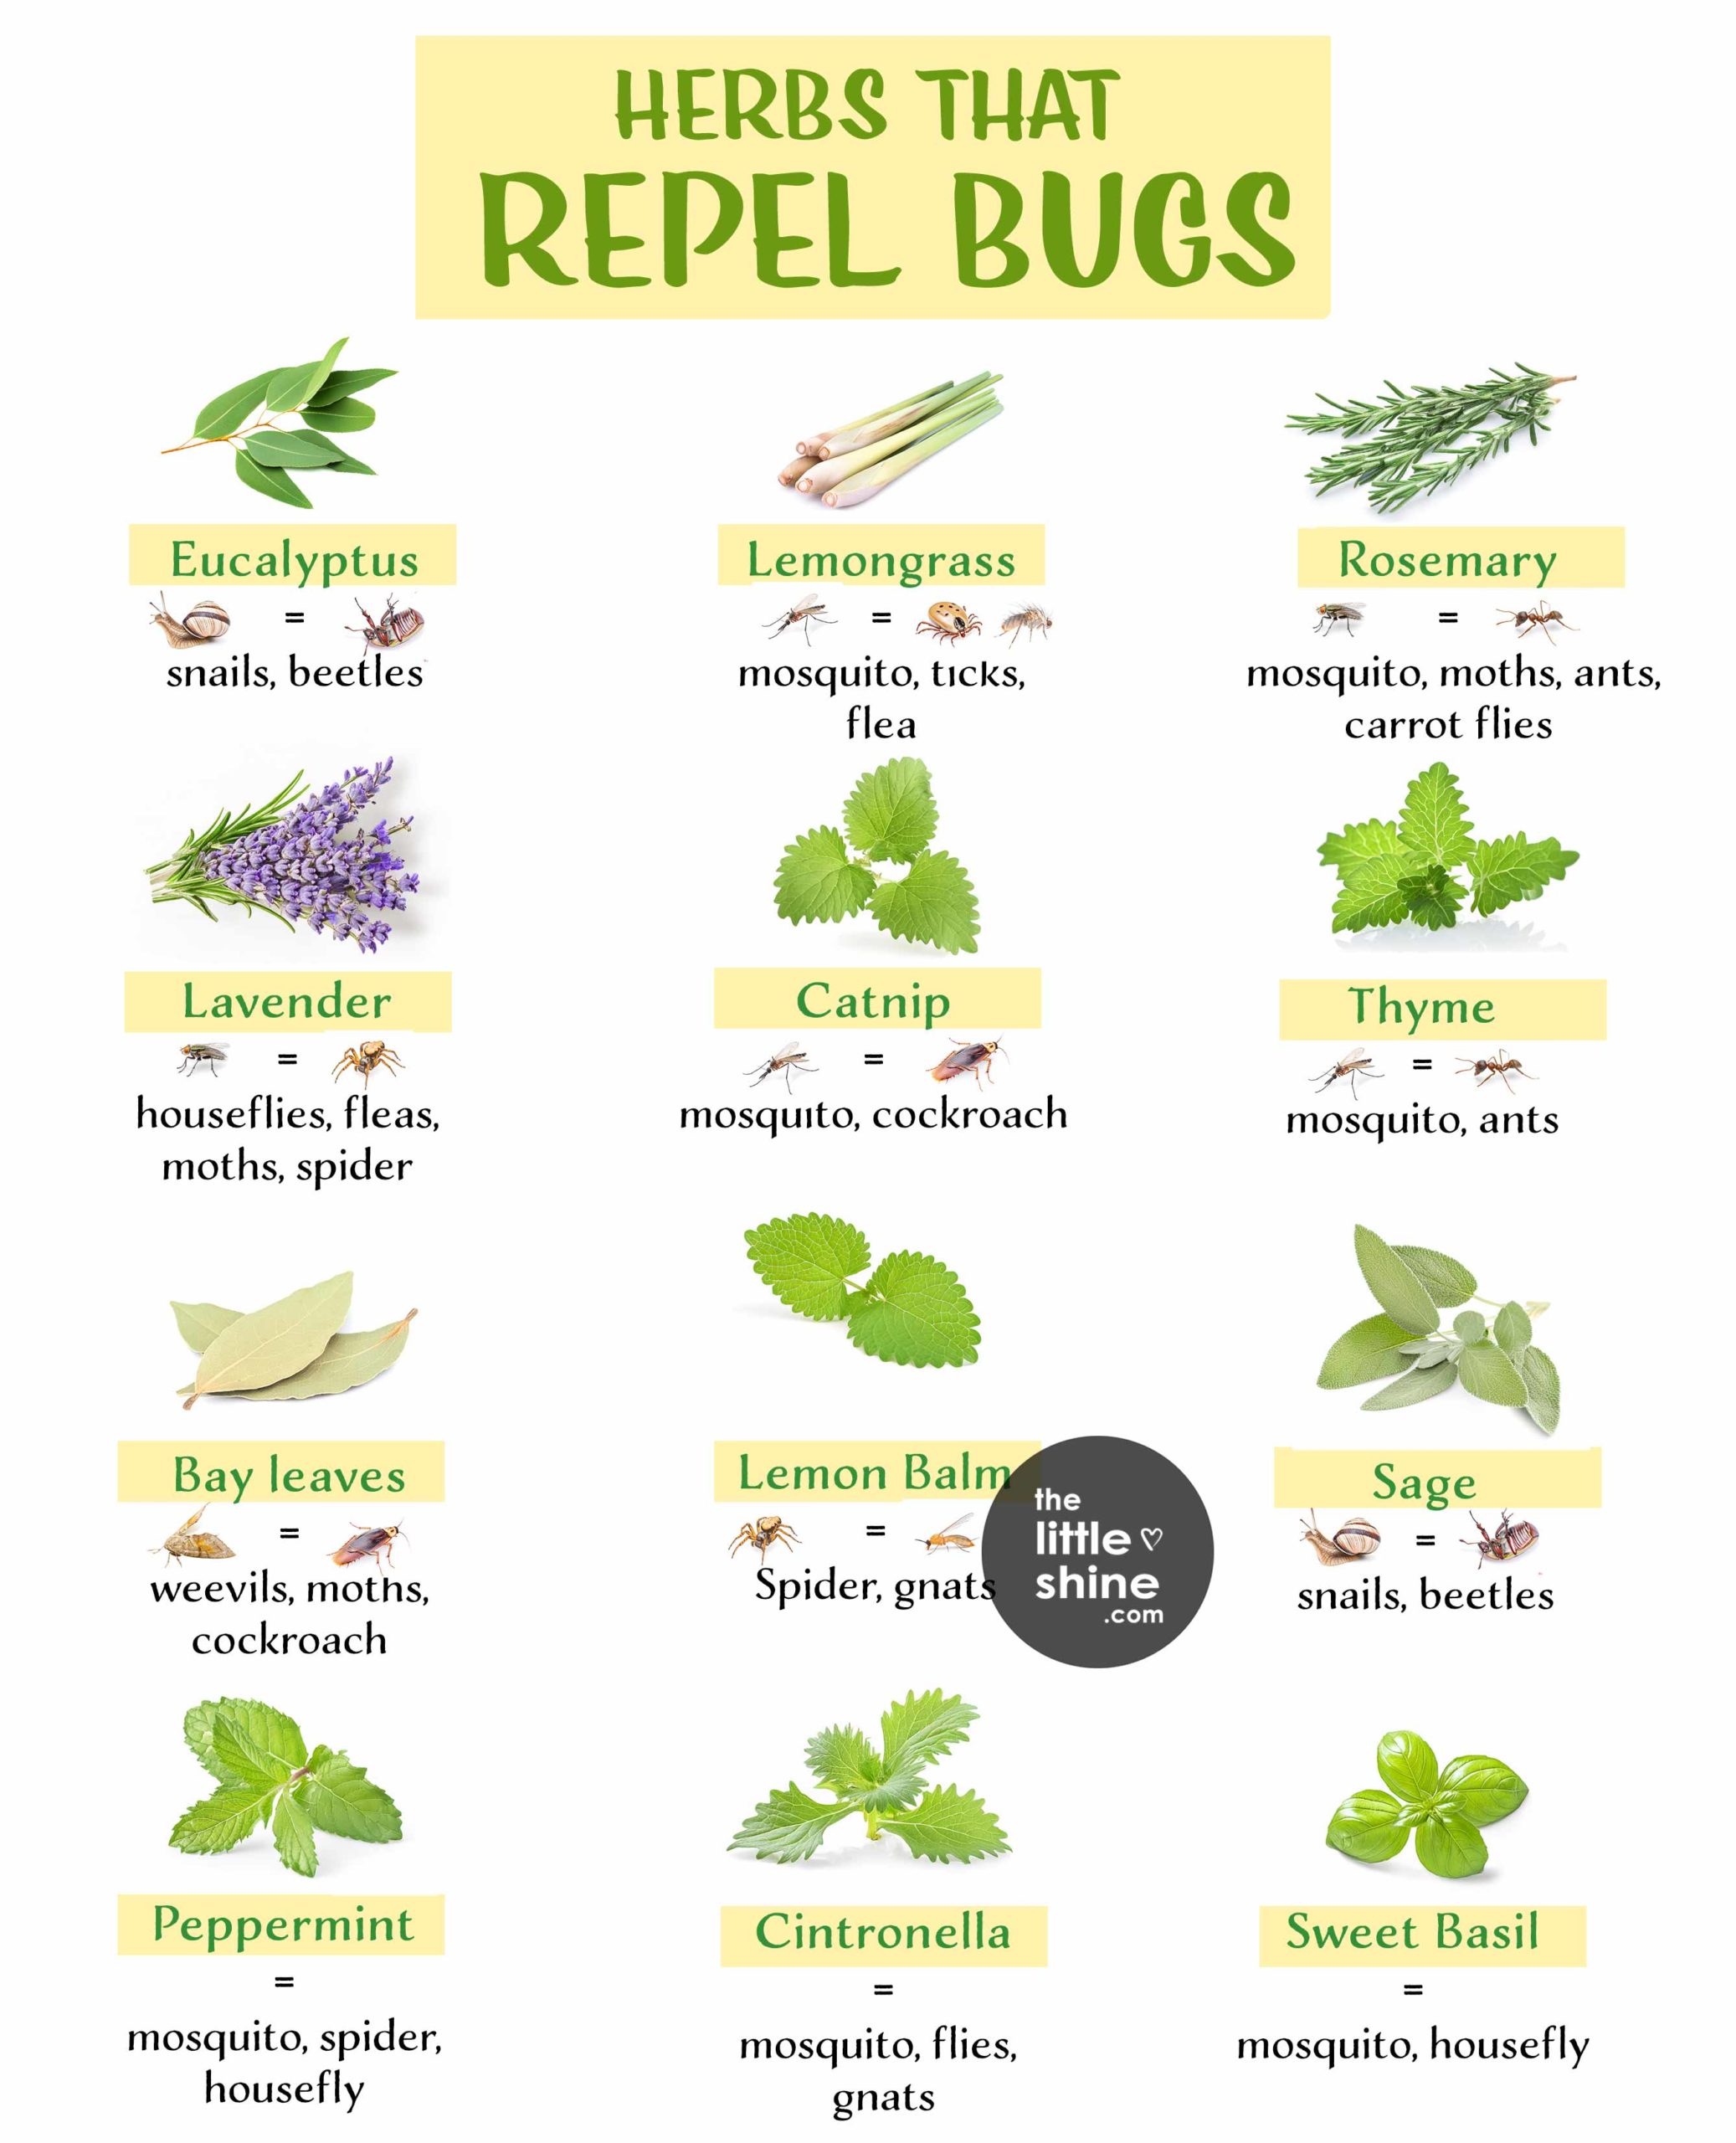 Herbs That Repel Bugs and How to Use